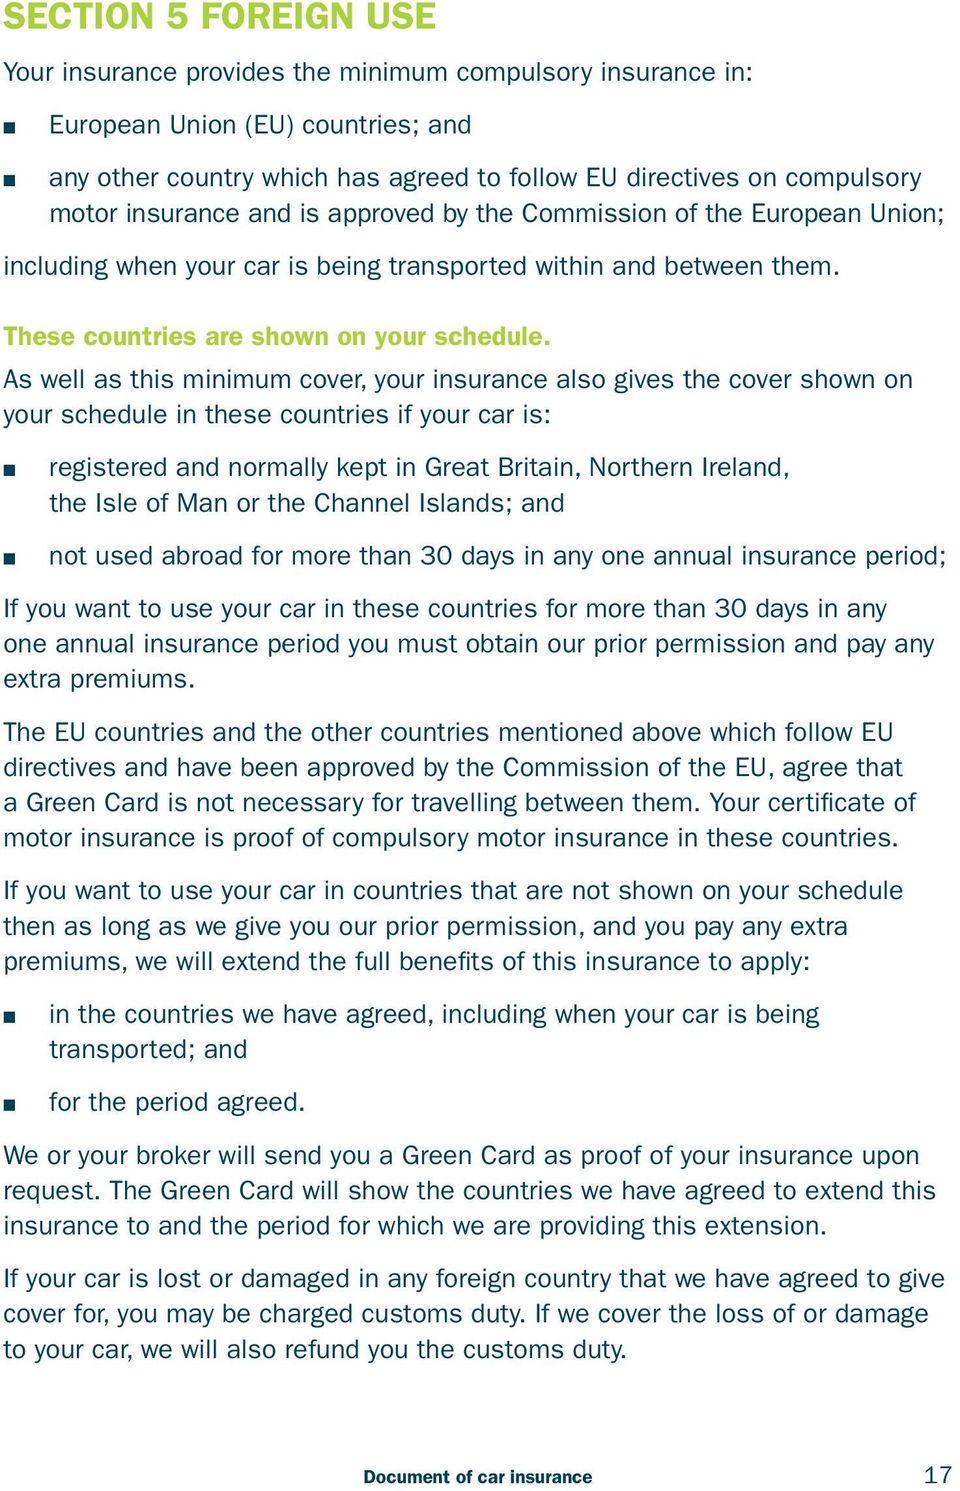 As well as this minimum cover, your insurance also gives the cover shown on your schedule in these countries if your car is: registered and normally kept in Great Britain, Northern Ireland, the Isle